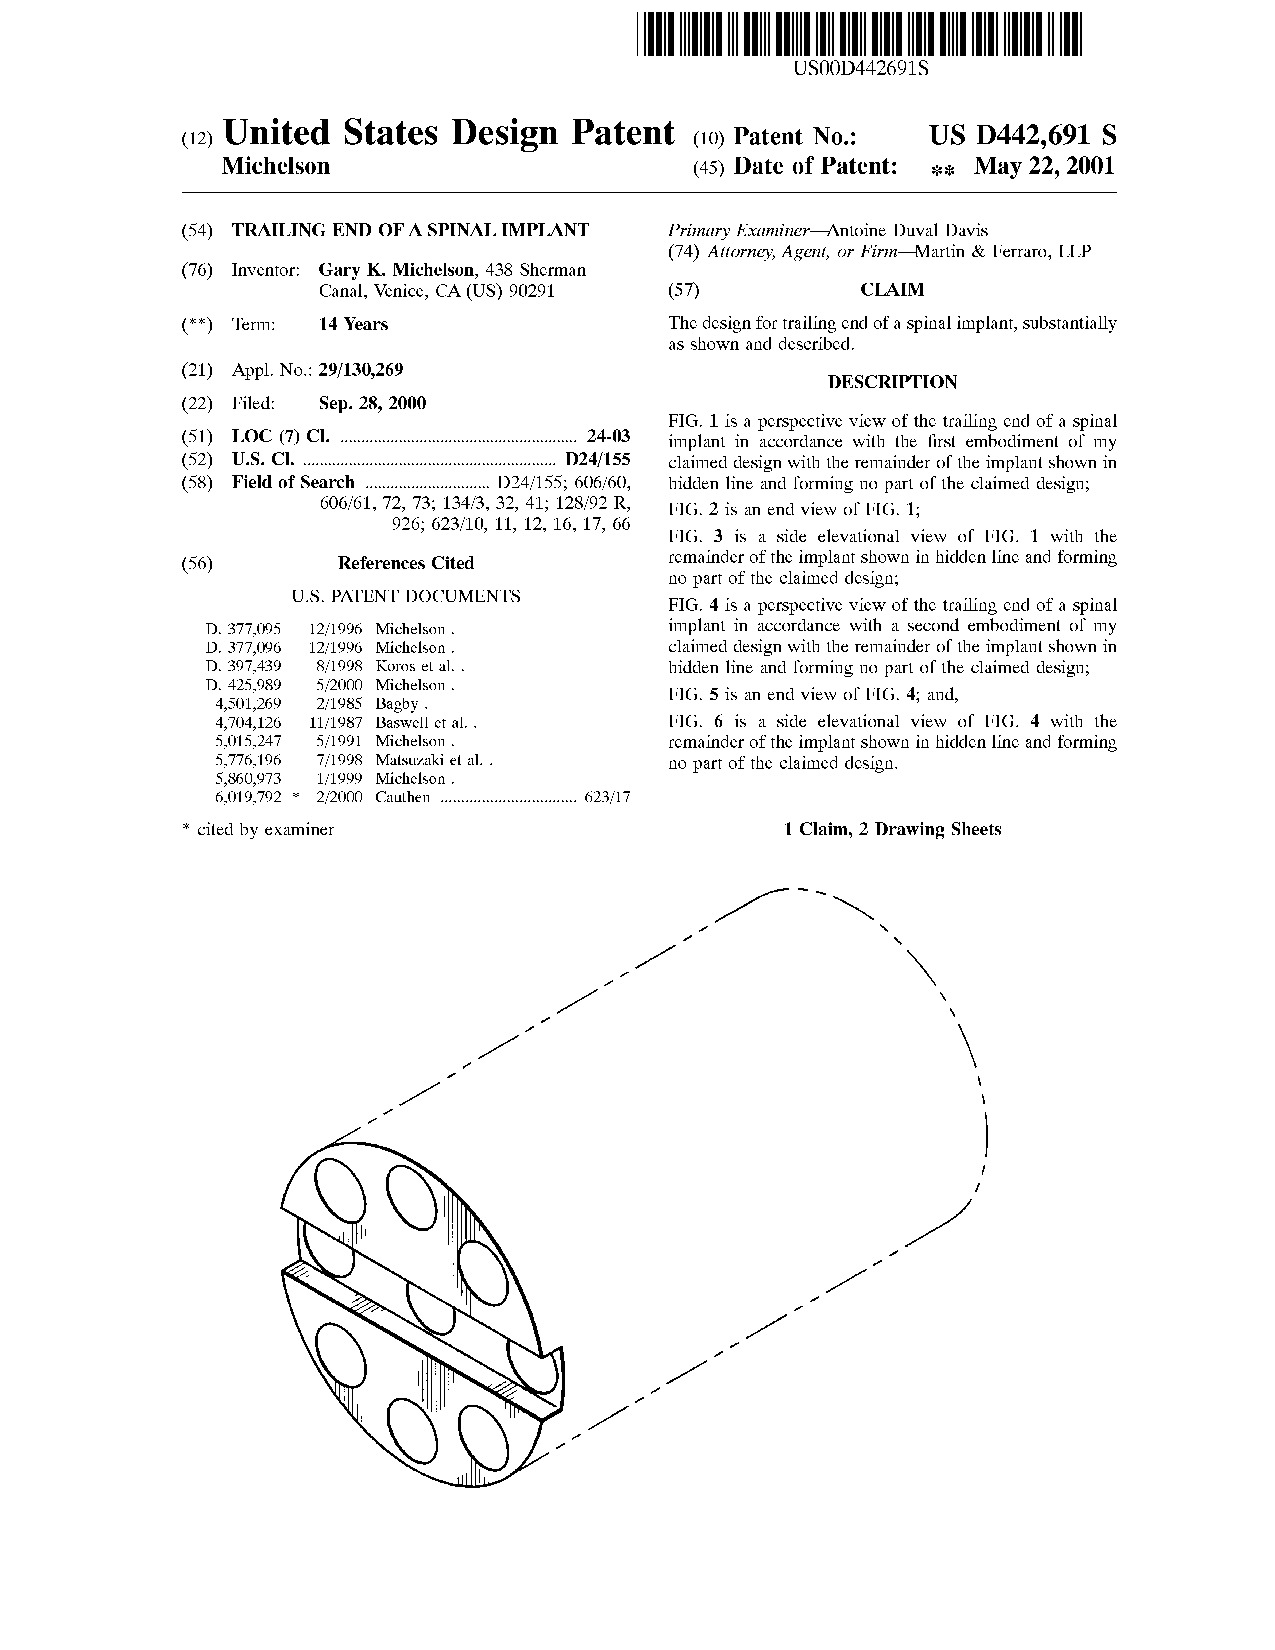 Trailing end of a spinal implant - Patent D442,691